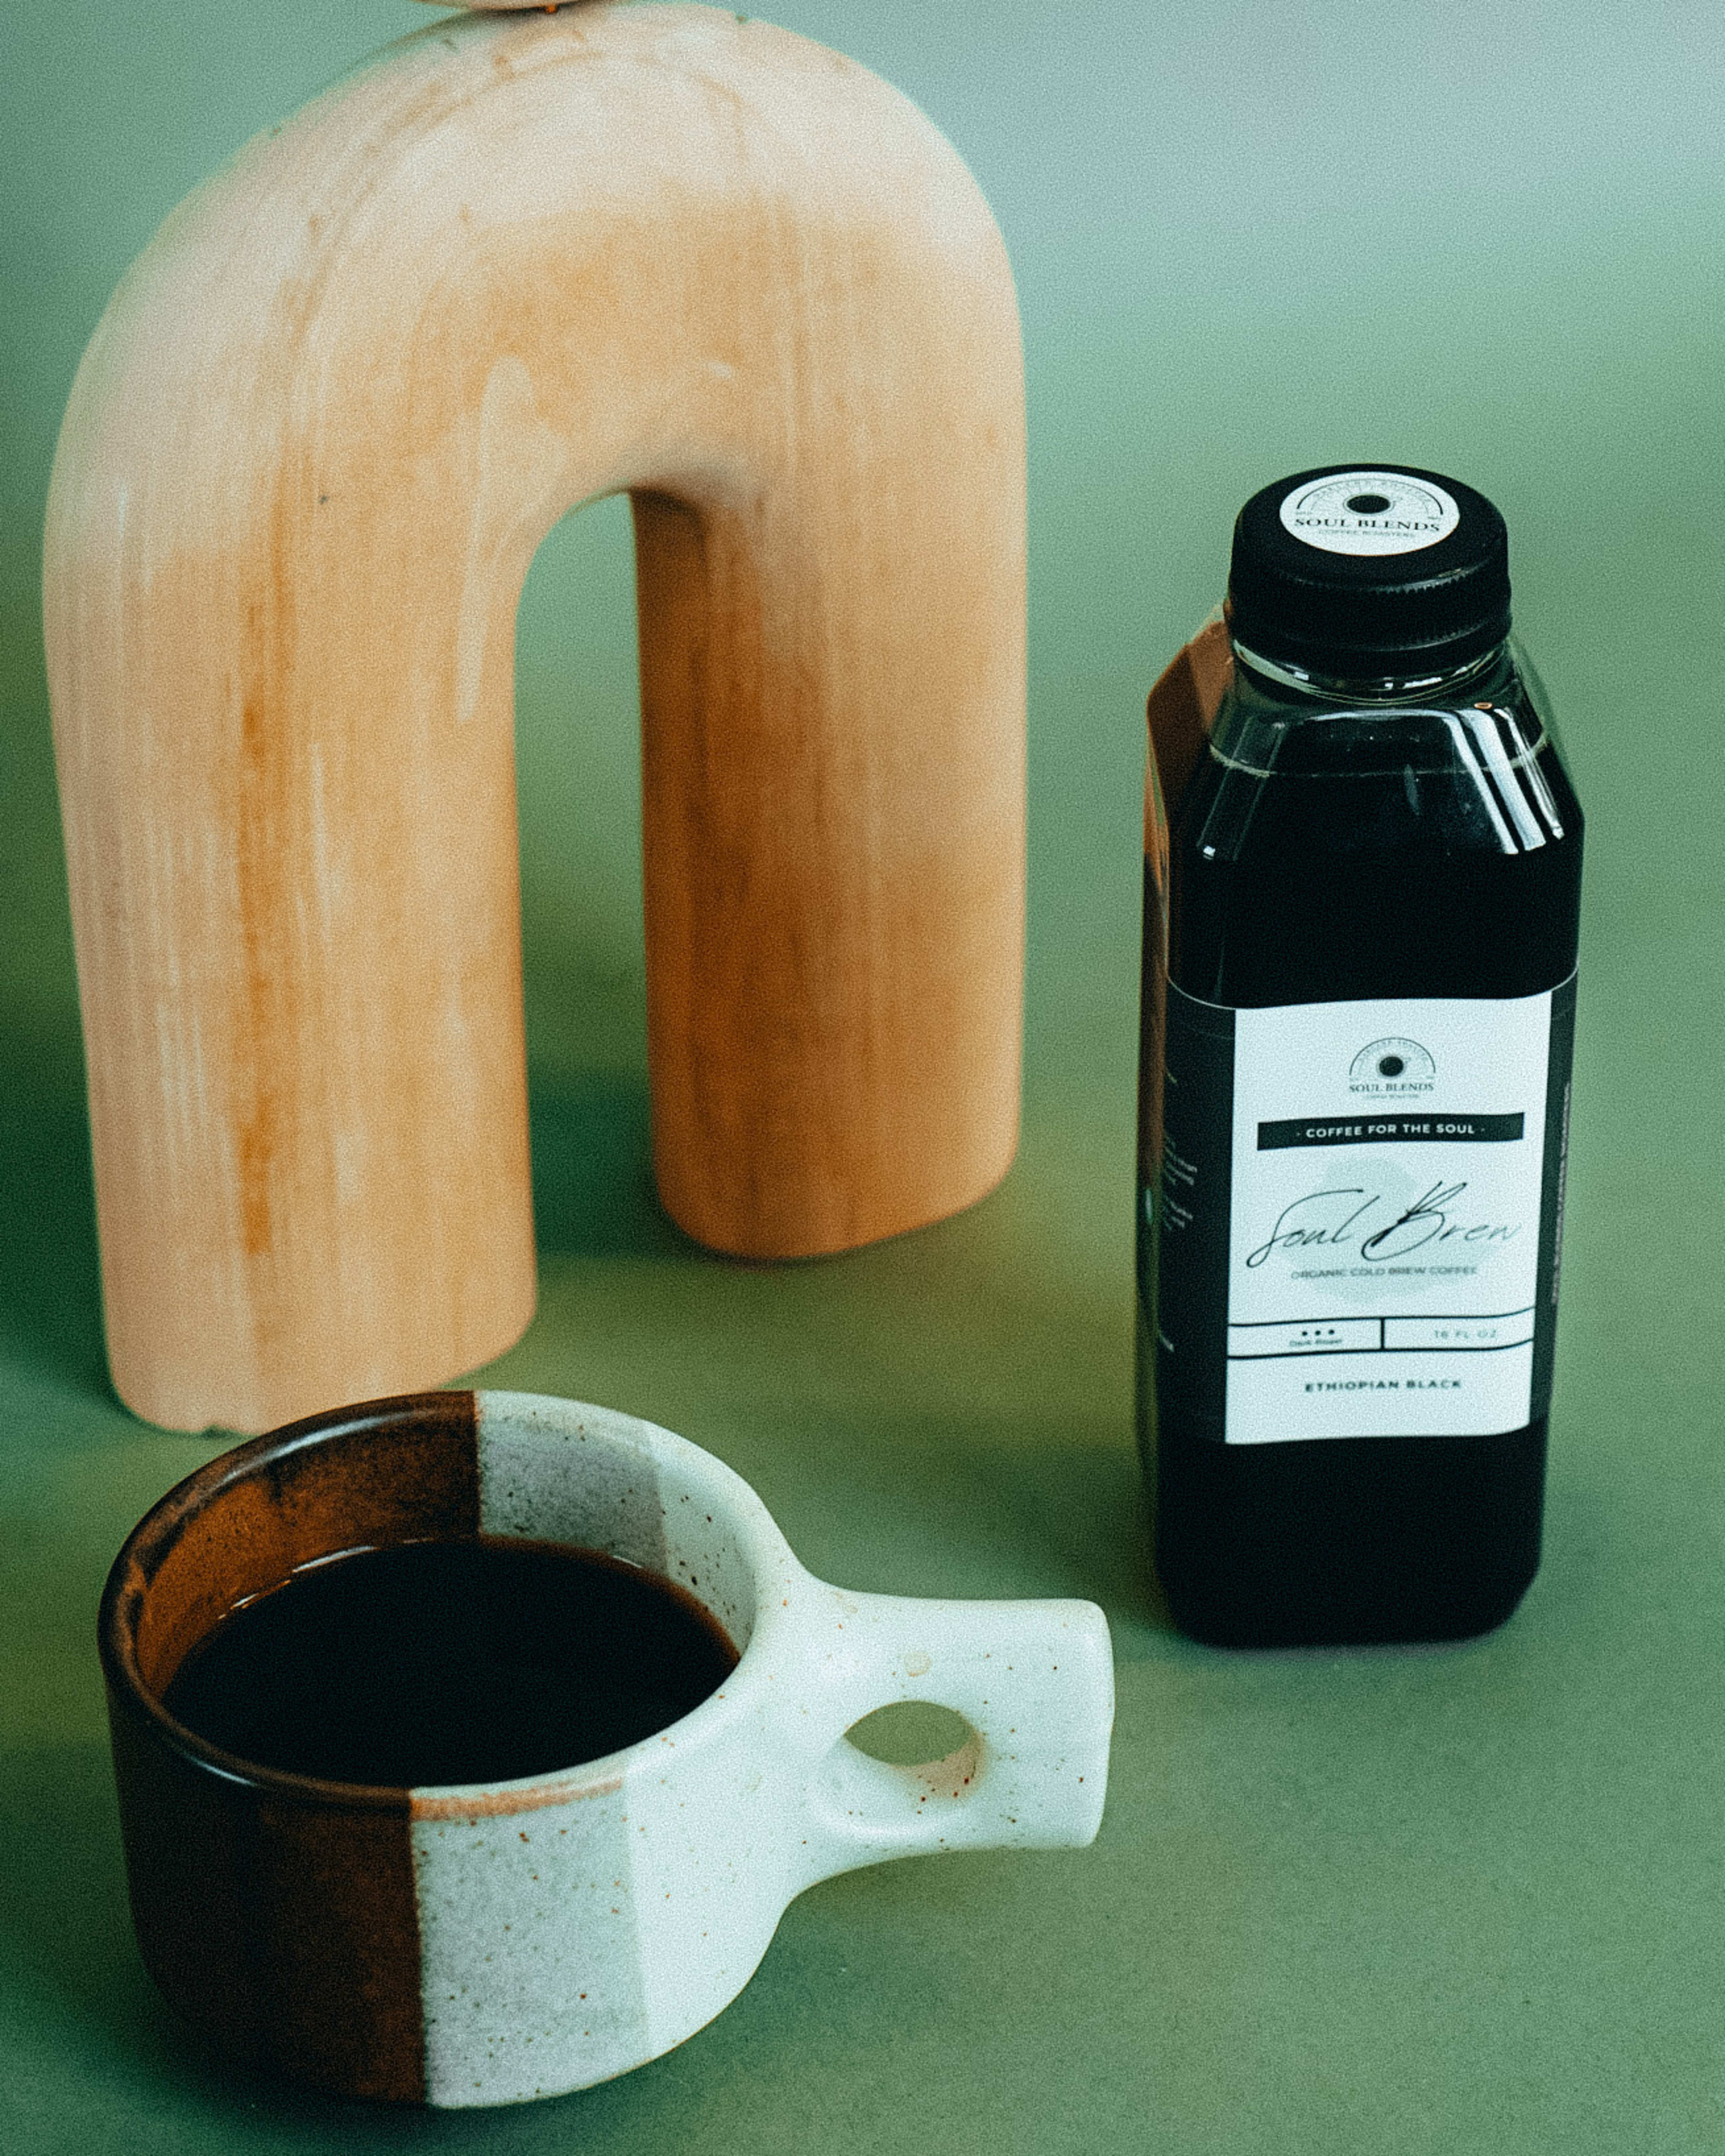 A wooden object next to a cup of coffee for a product photoshoot.